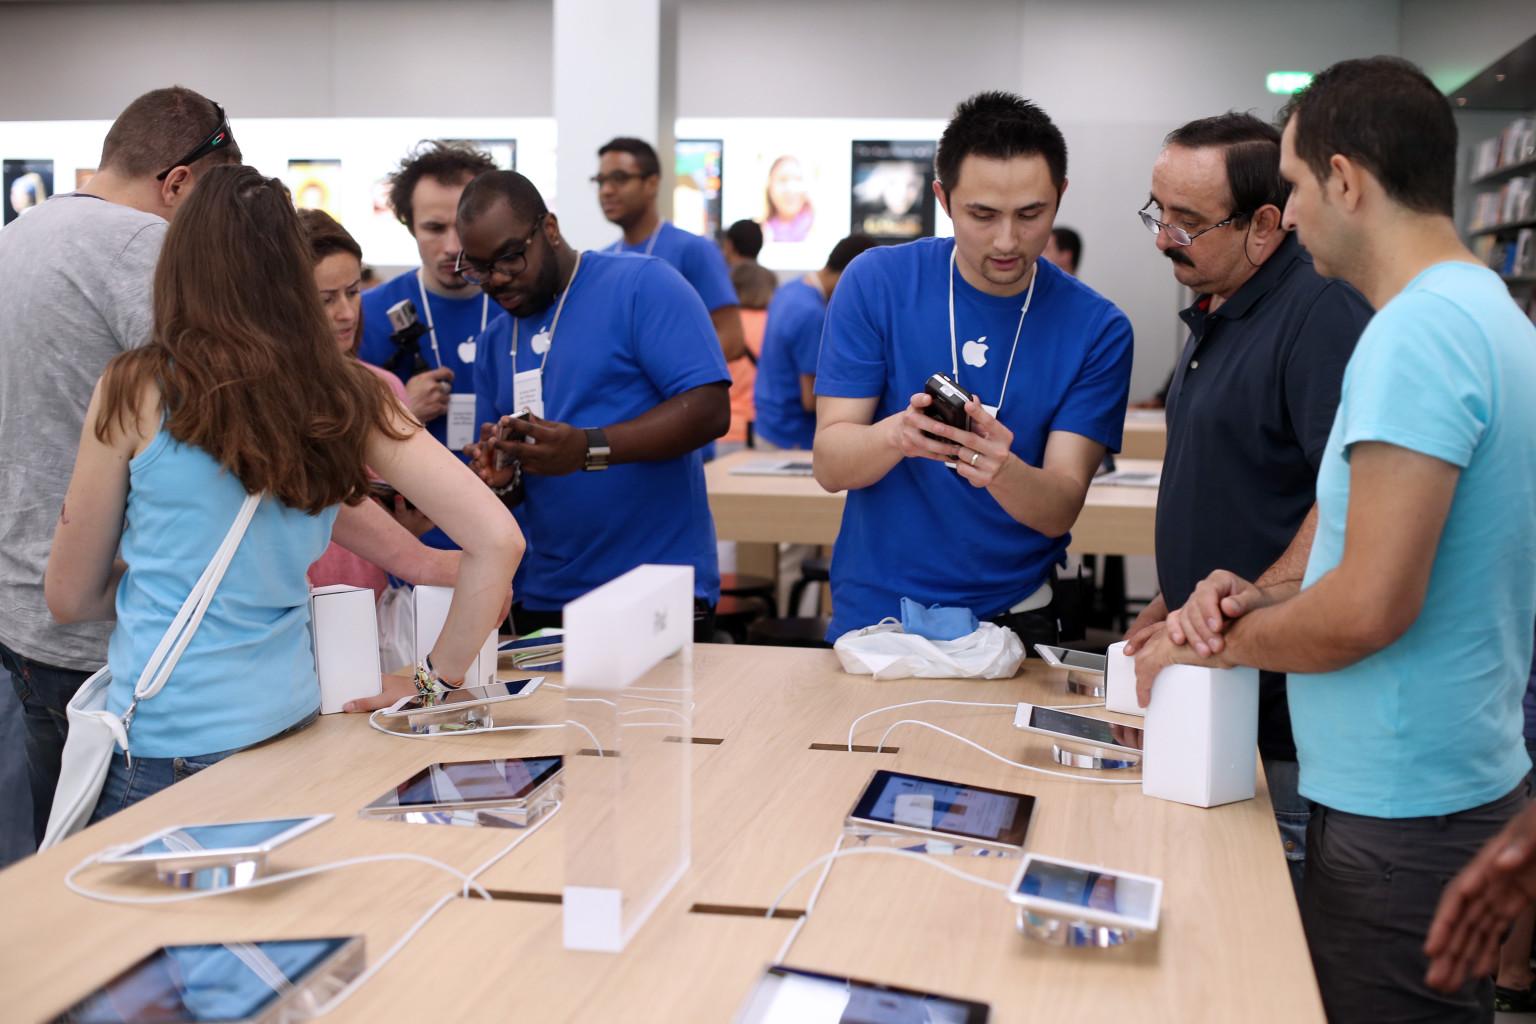 Employees show to customers Apple's iPhone 5 smartphones over iPads in a new Apple store on July 6, 2013 in Rosny-sous-Bois, near Paris. AFP PHOTO / THOMAS SAMSON (Photo credit should read THOMAS SAMSON/AFP/Getty Images)